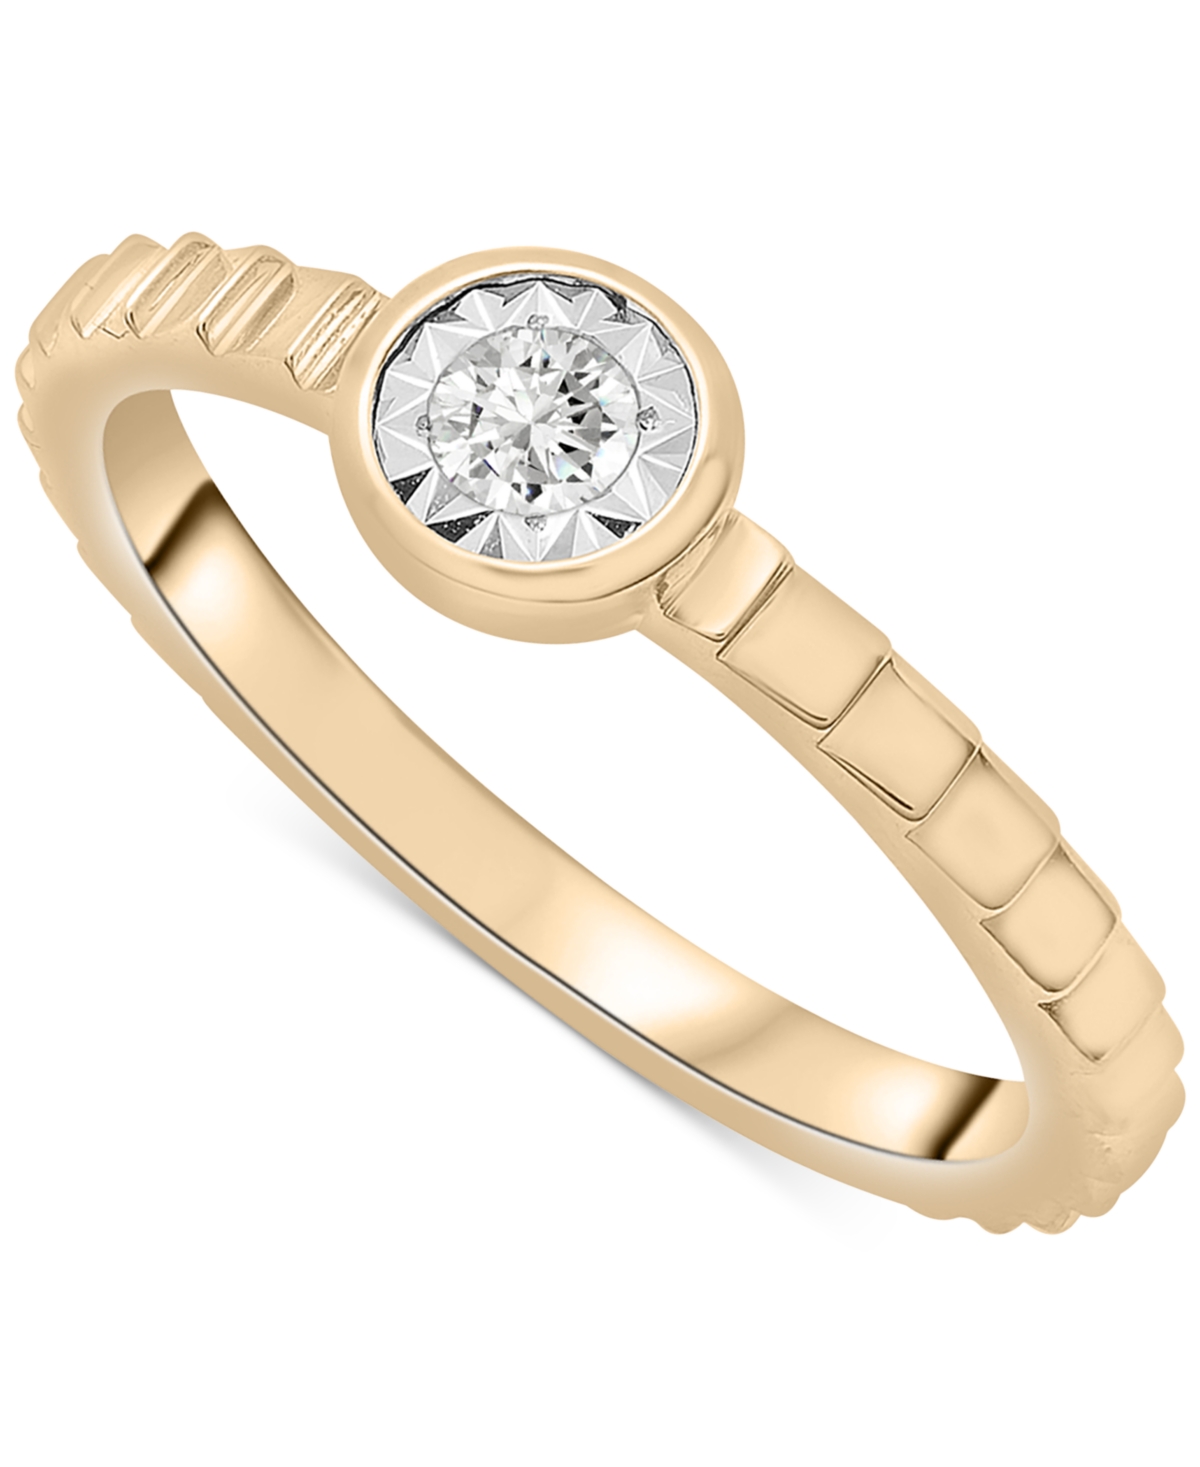 Diamond Miracle-Plate Textured Ring (1/10 ct. t.w.) in Gold Vermeil, Created for Macy's - Gold Vermeil